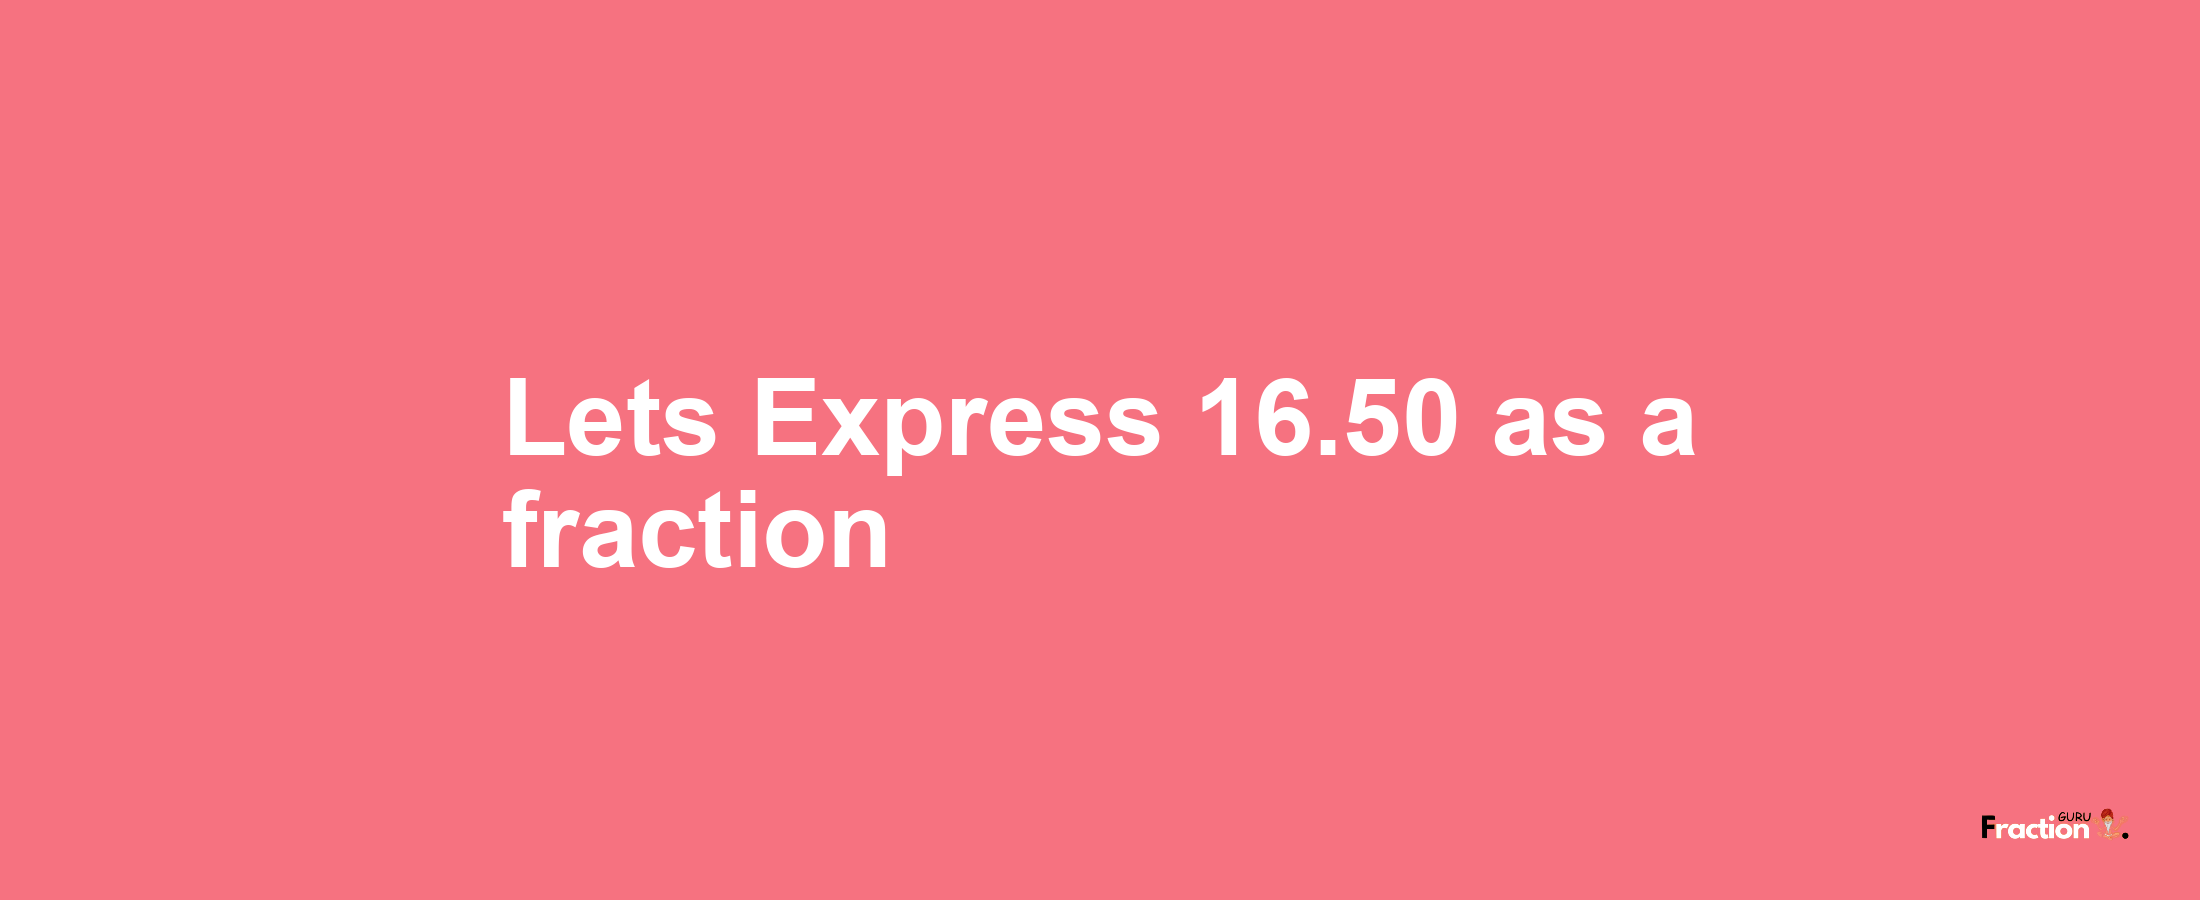 Lets Express 16.50 as afraction